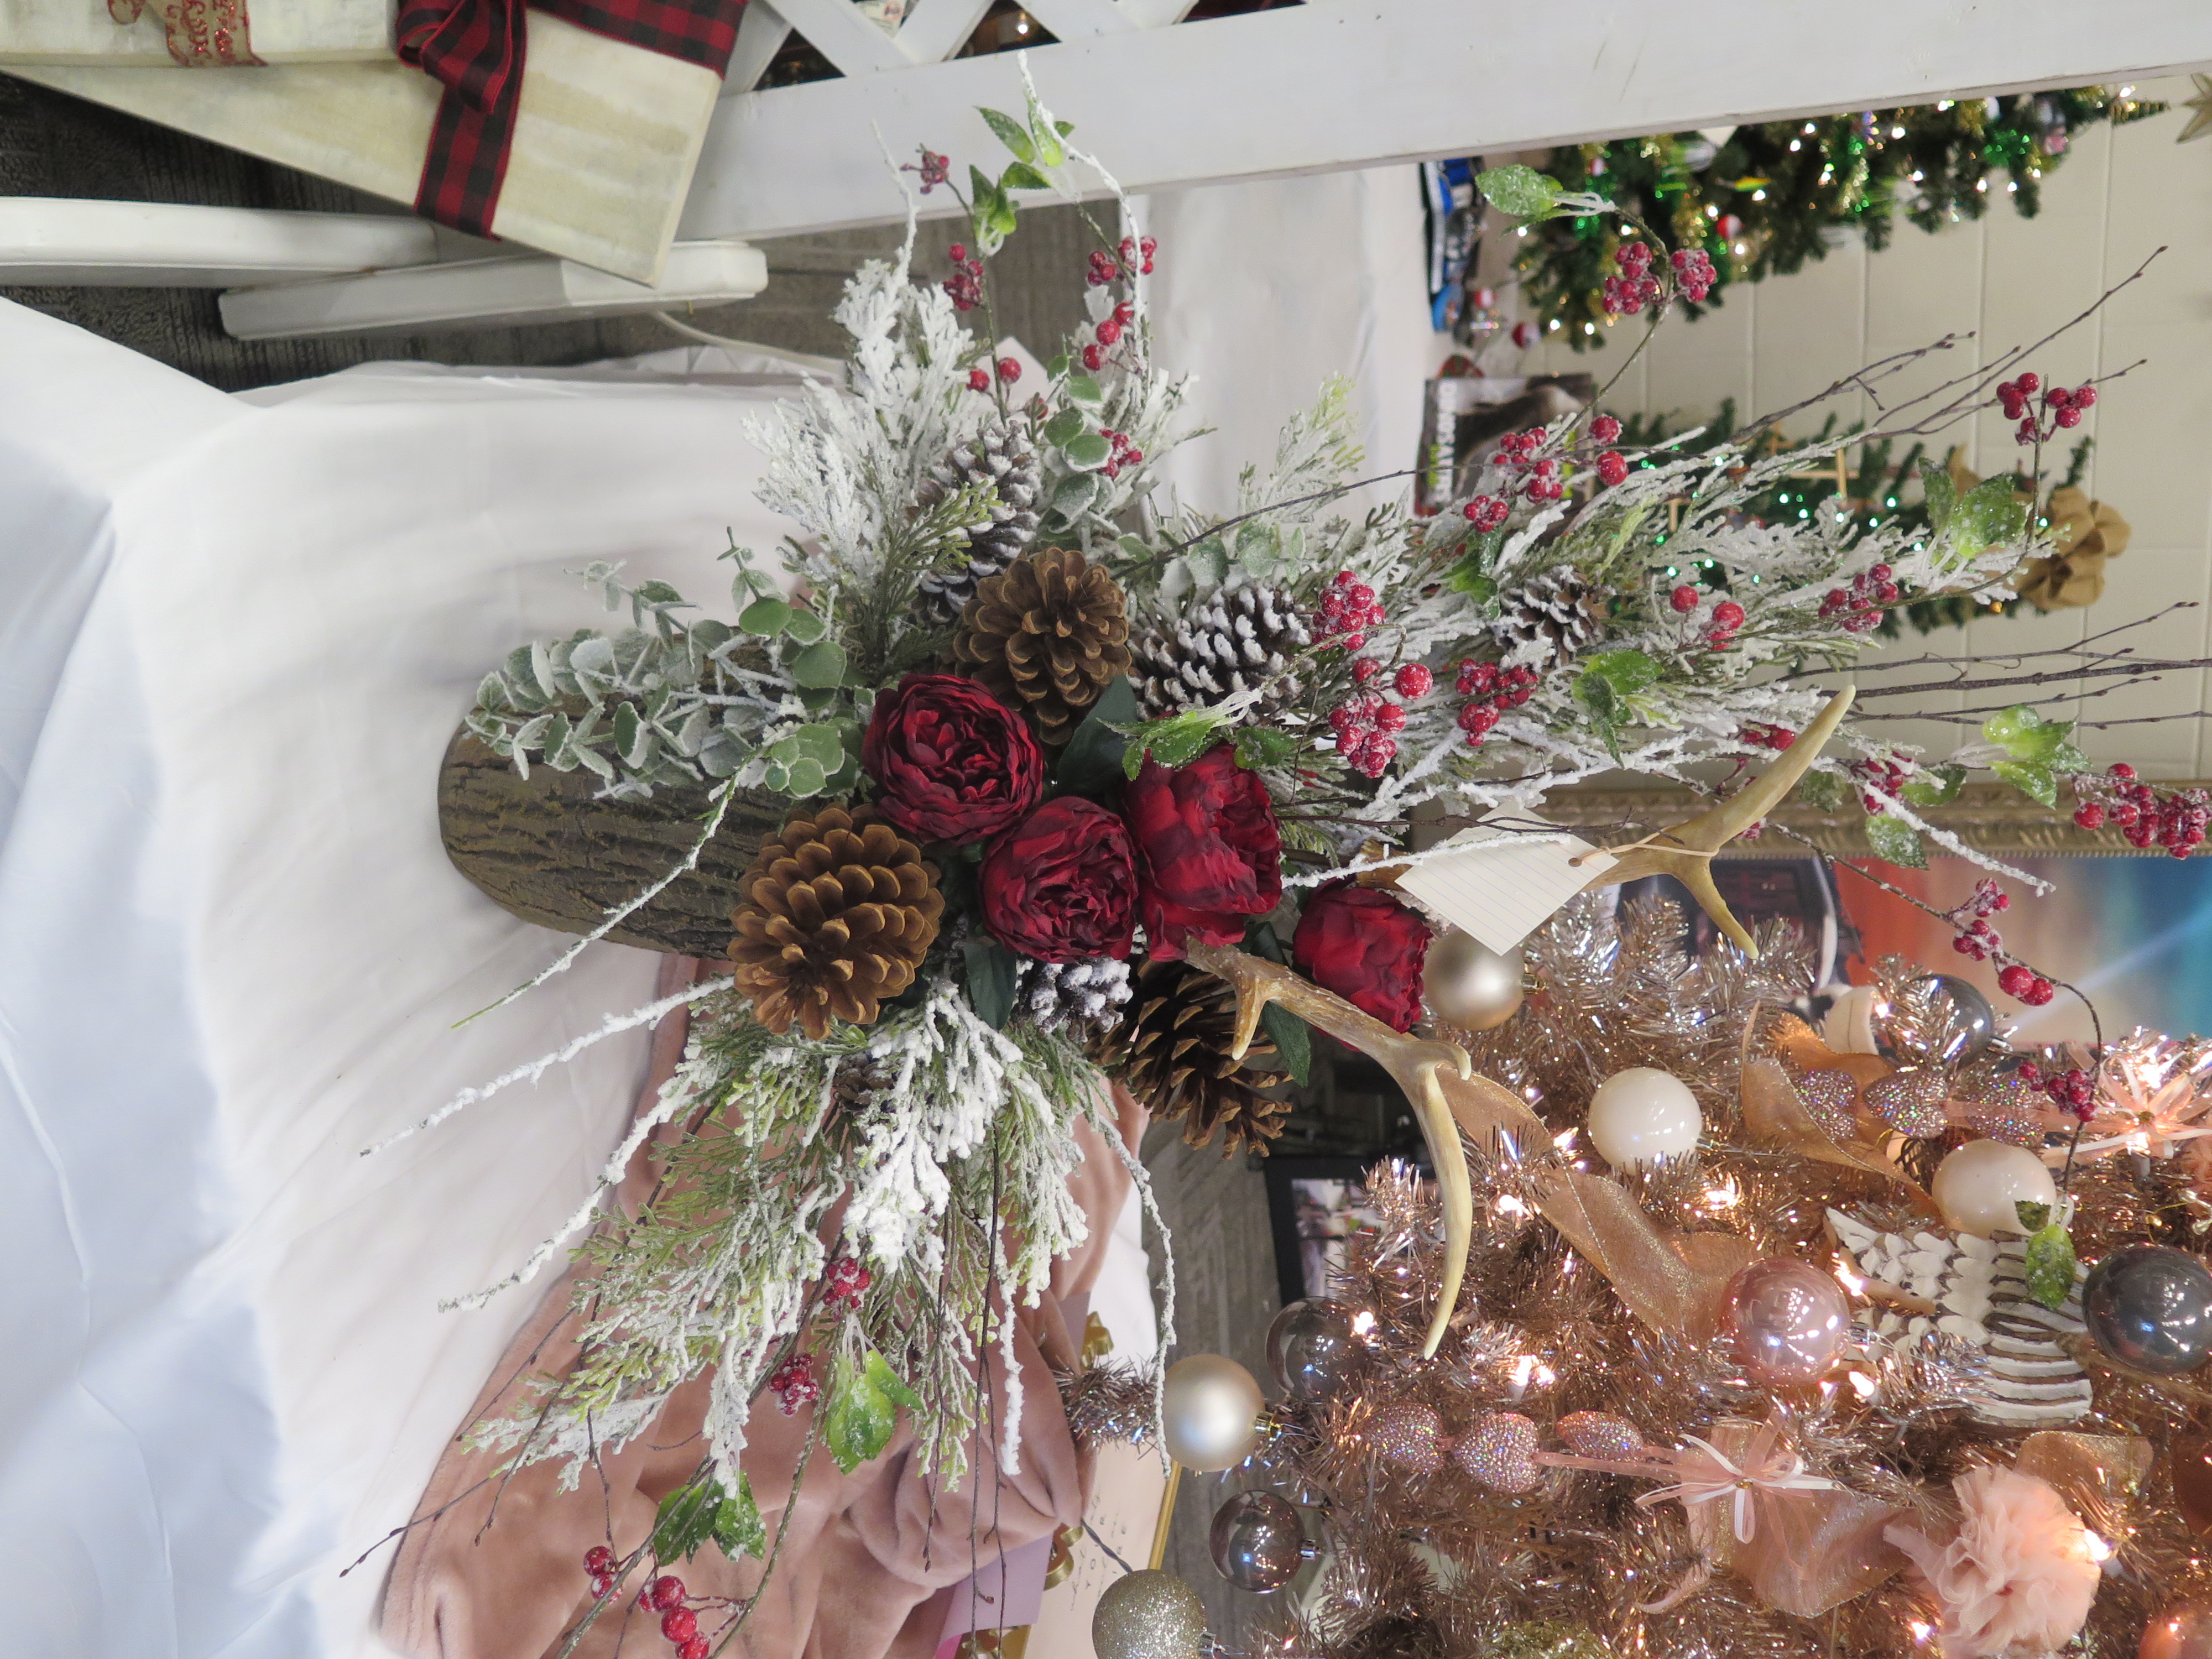 /Events/Festival Of Trees/Images/Imlay Florist.JPG